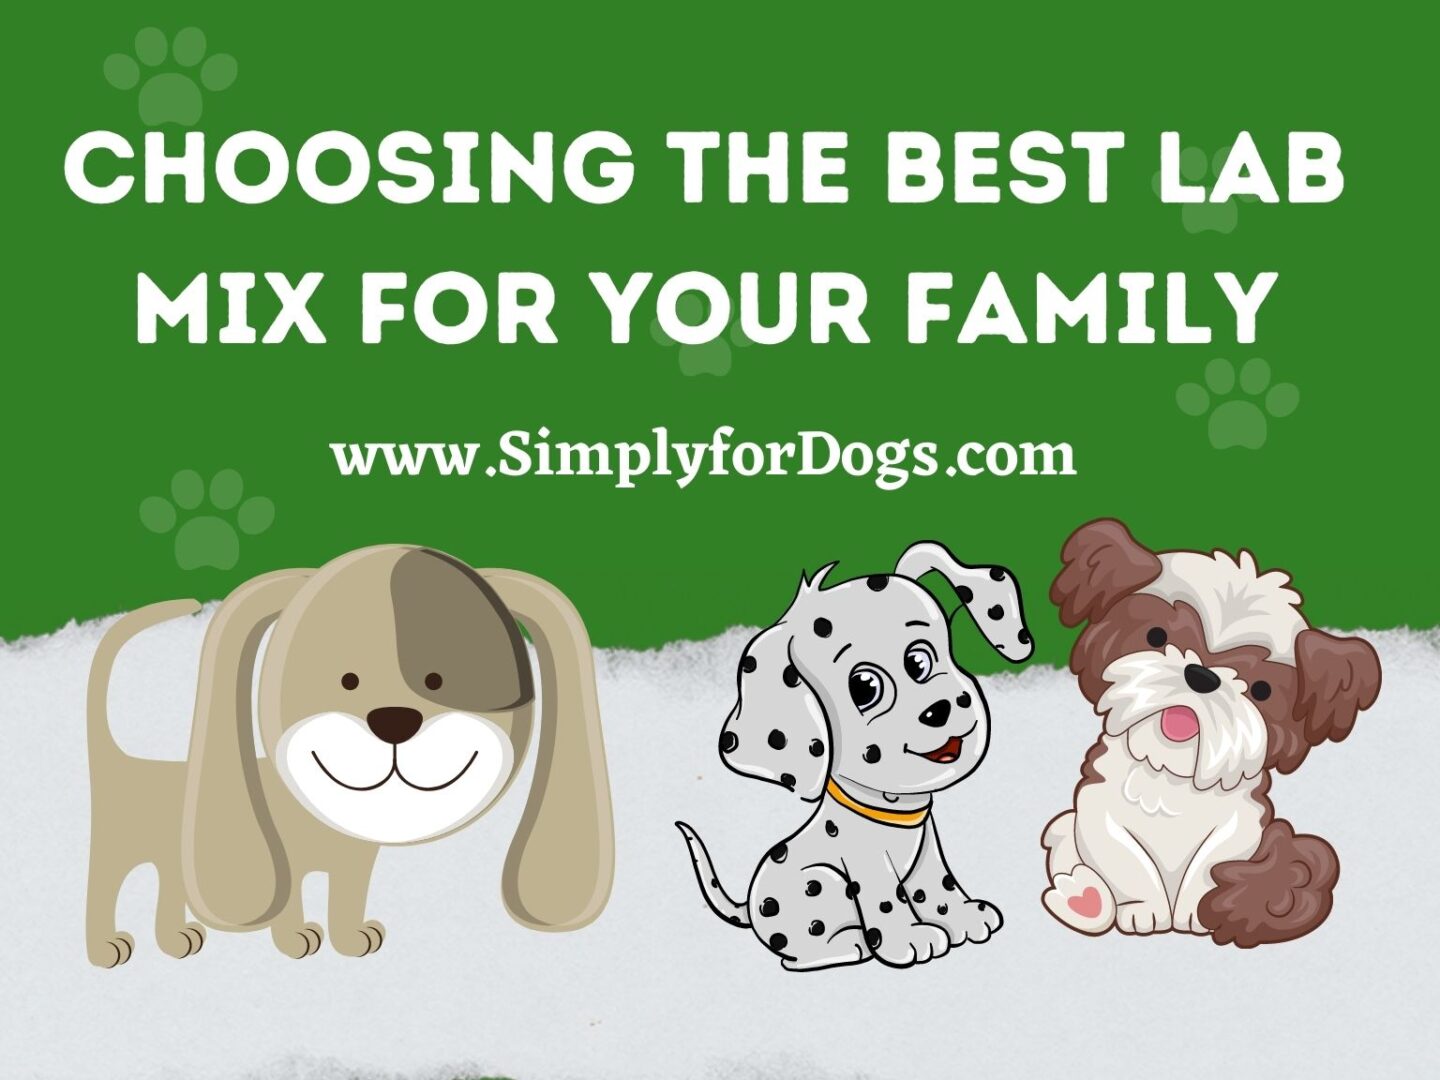 Choosing the Best Lab Mix for Your Family